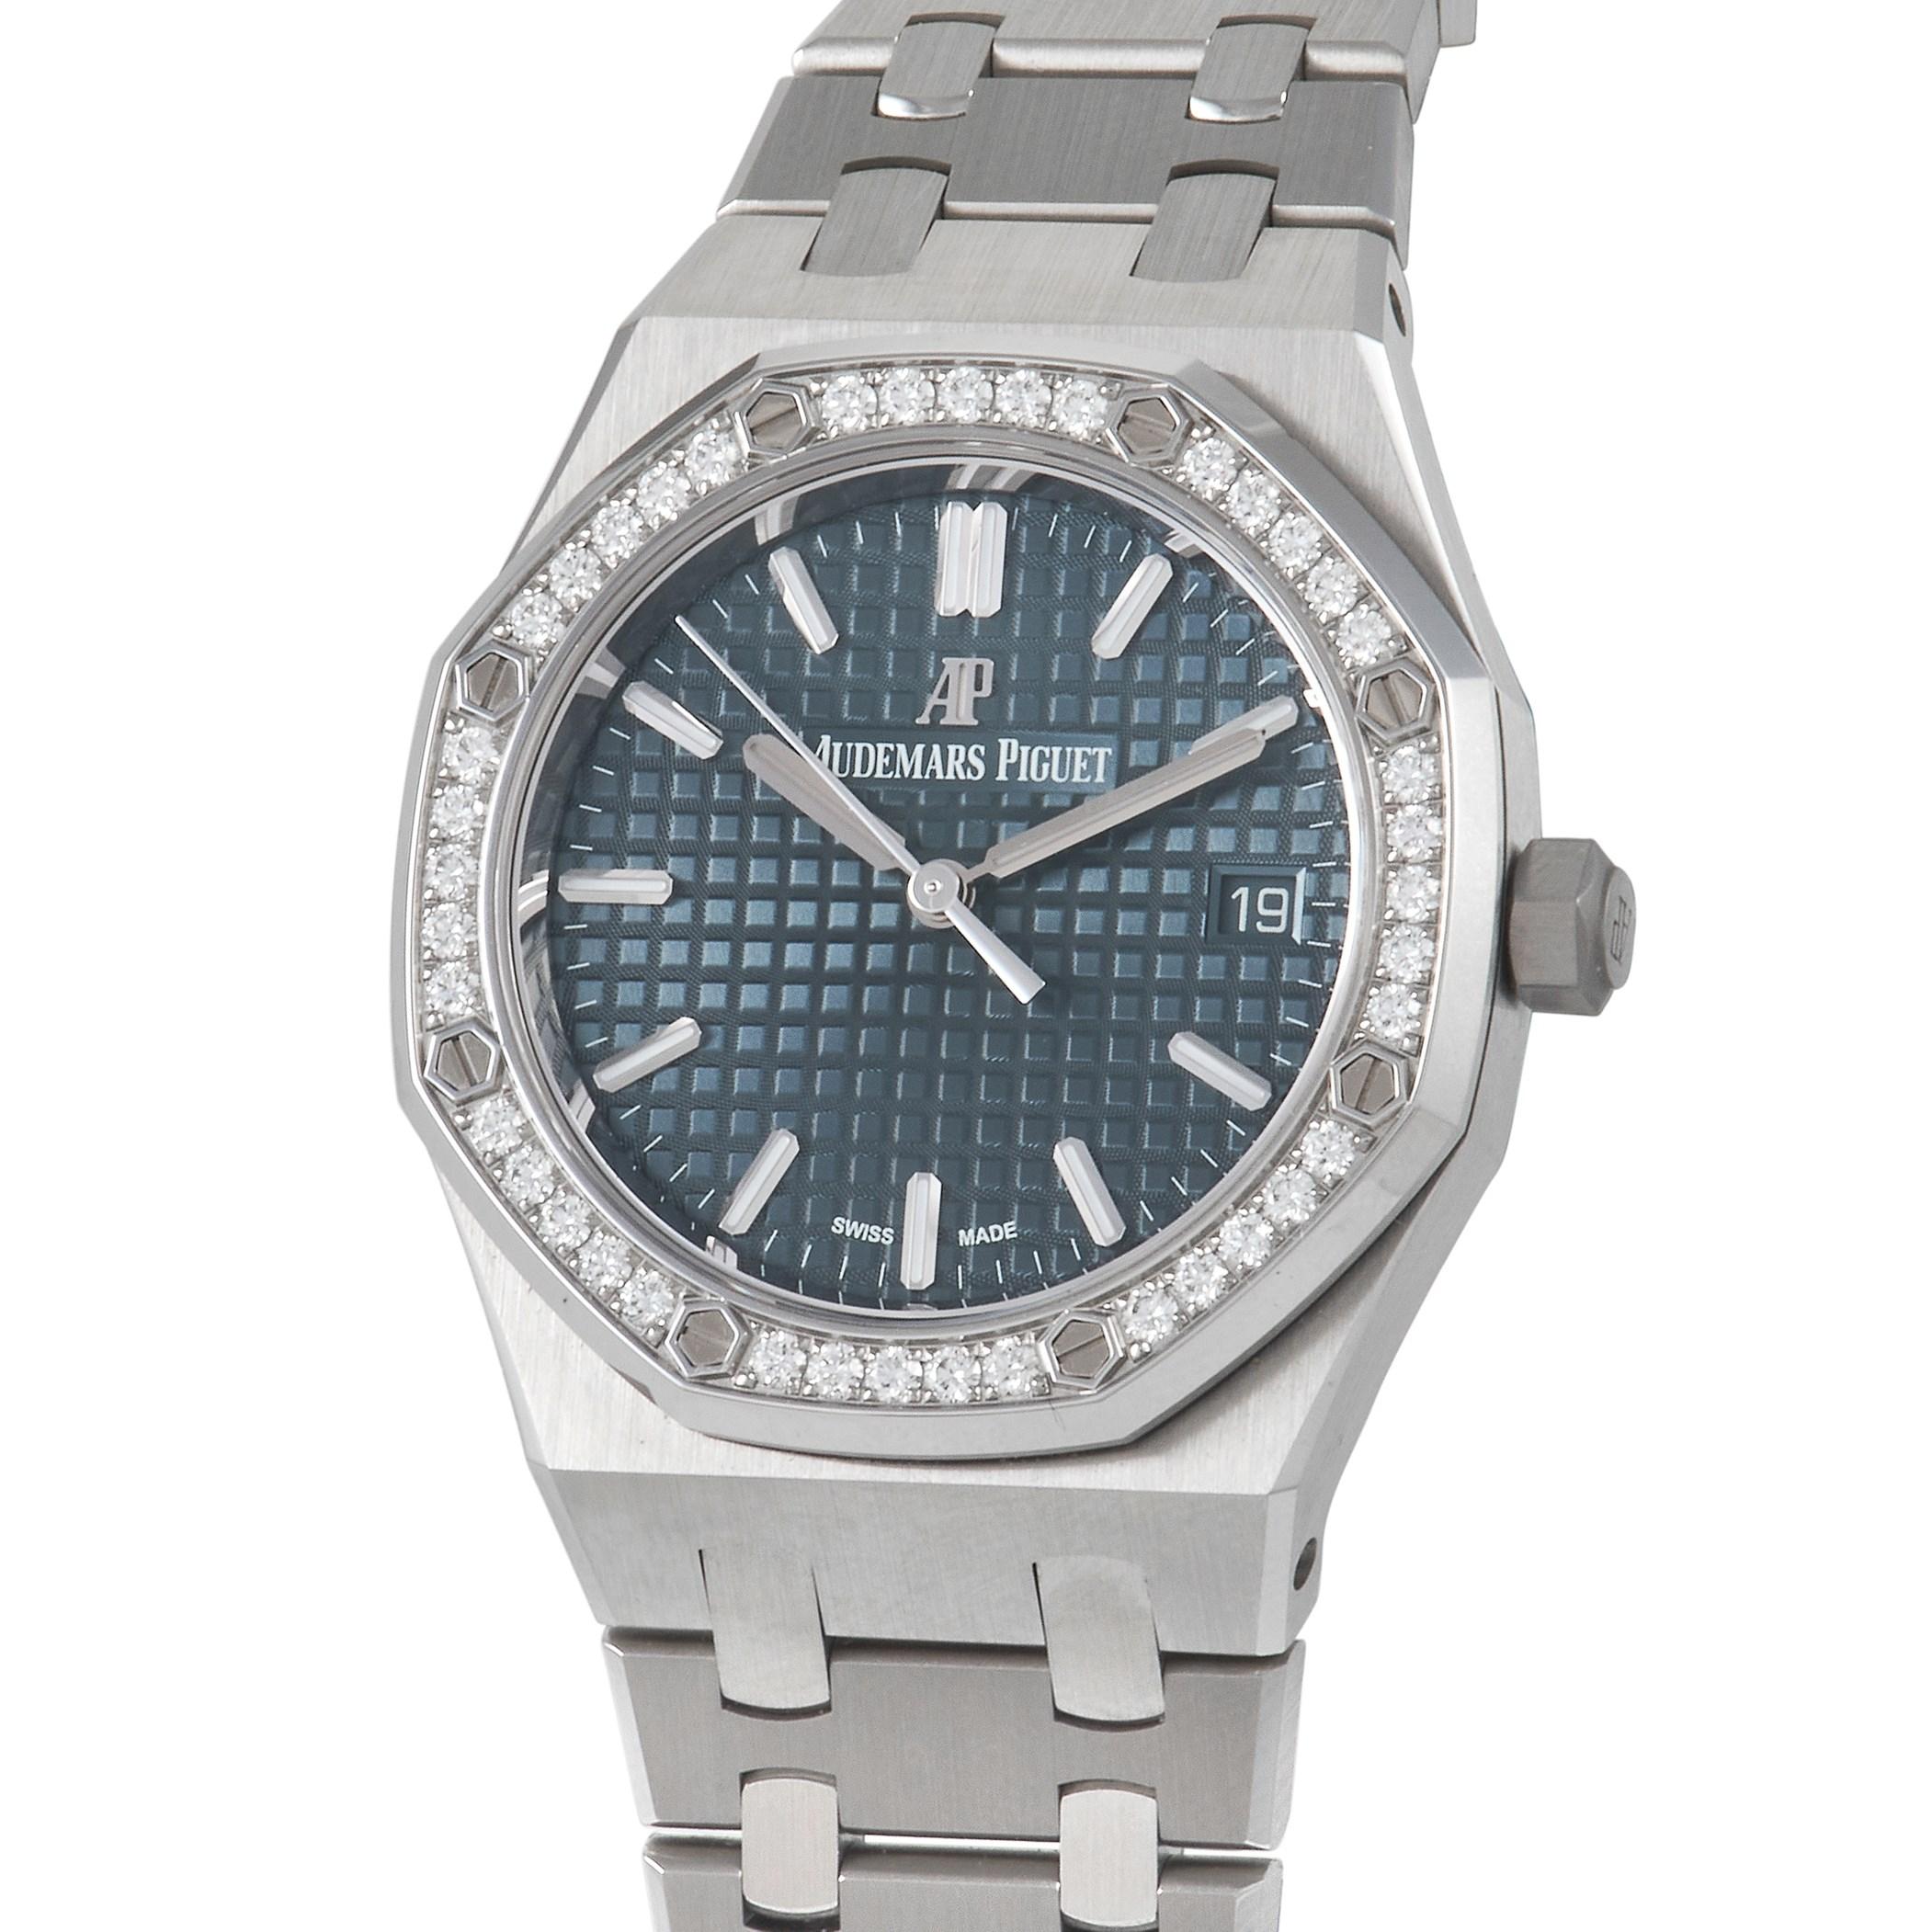 Smaller than your average Royal Oak but just as stunning. The Audemars Piguet Royal Oak Diamond Blue-Grey Dial Ladies Watch 77351ST.ZZ.1261ST.01 is designed for small wrists given its 34mm case diameter. It comes with a beautiful blue-grey dial with